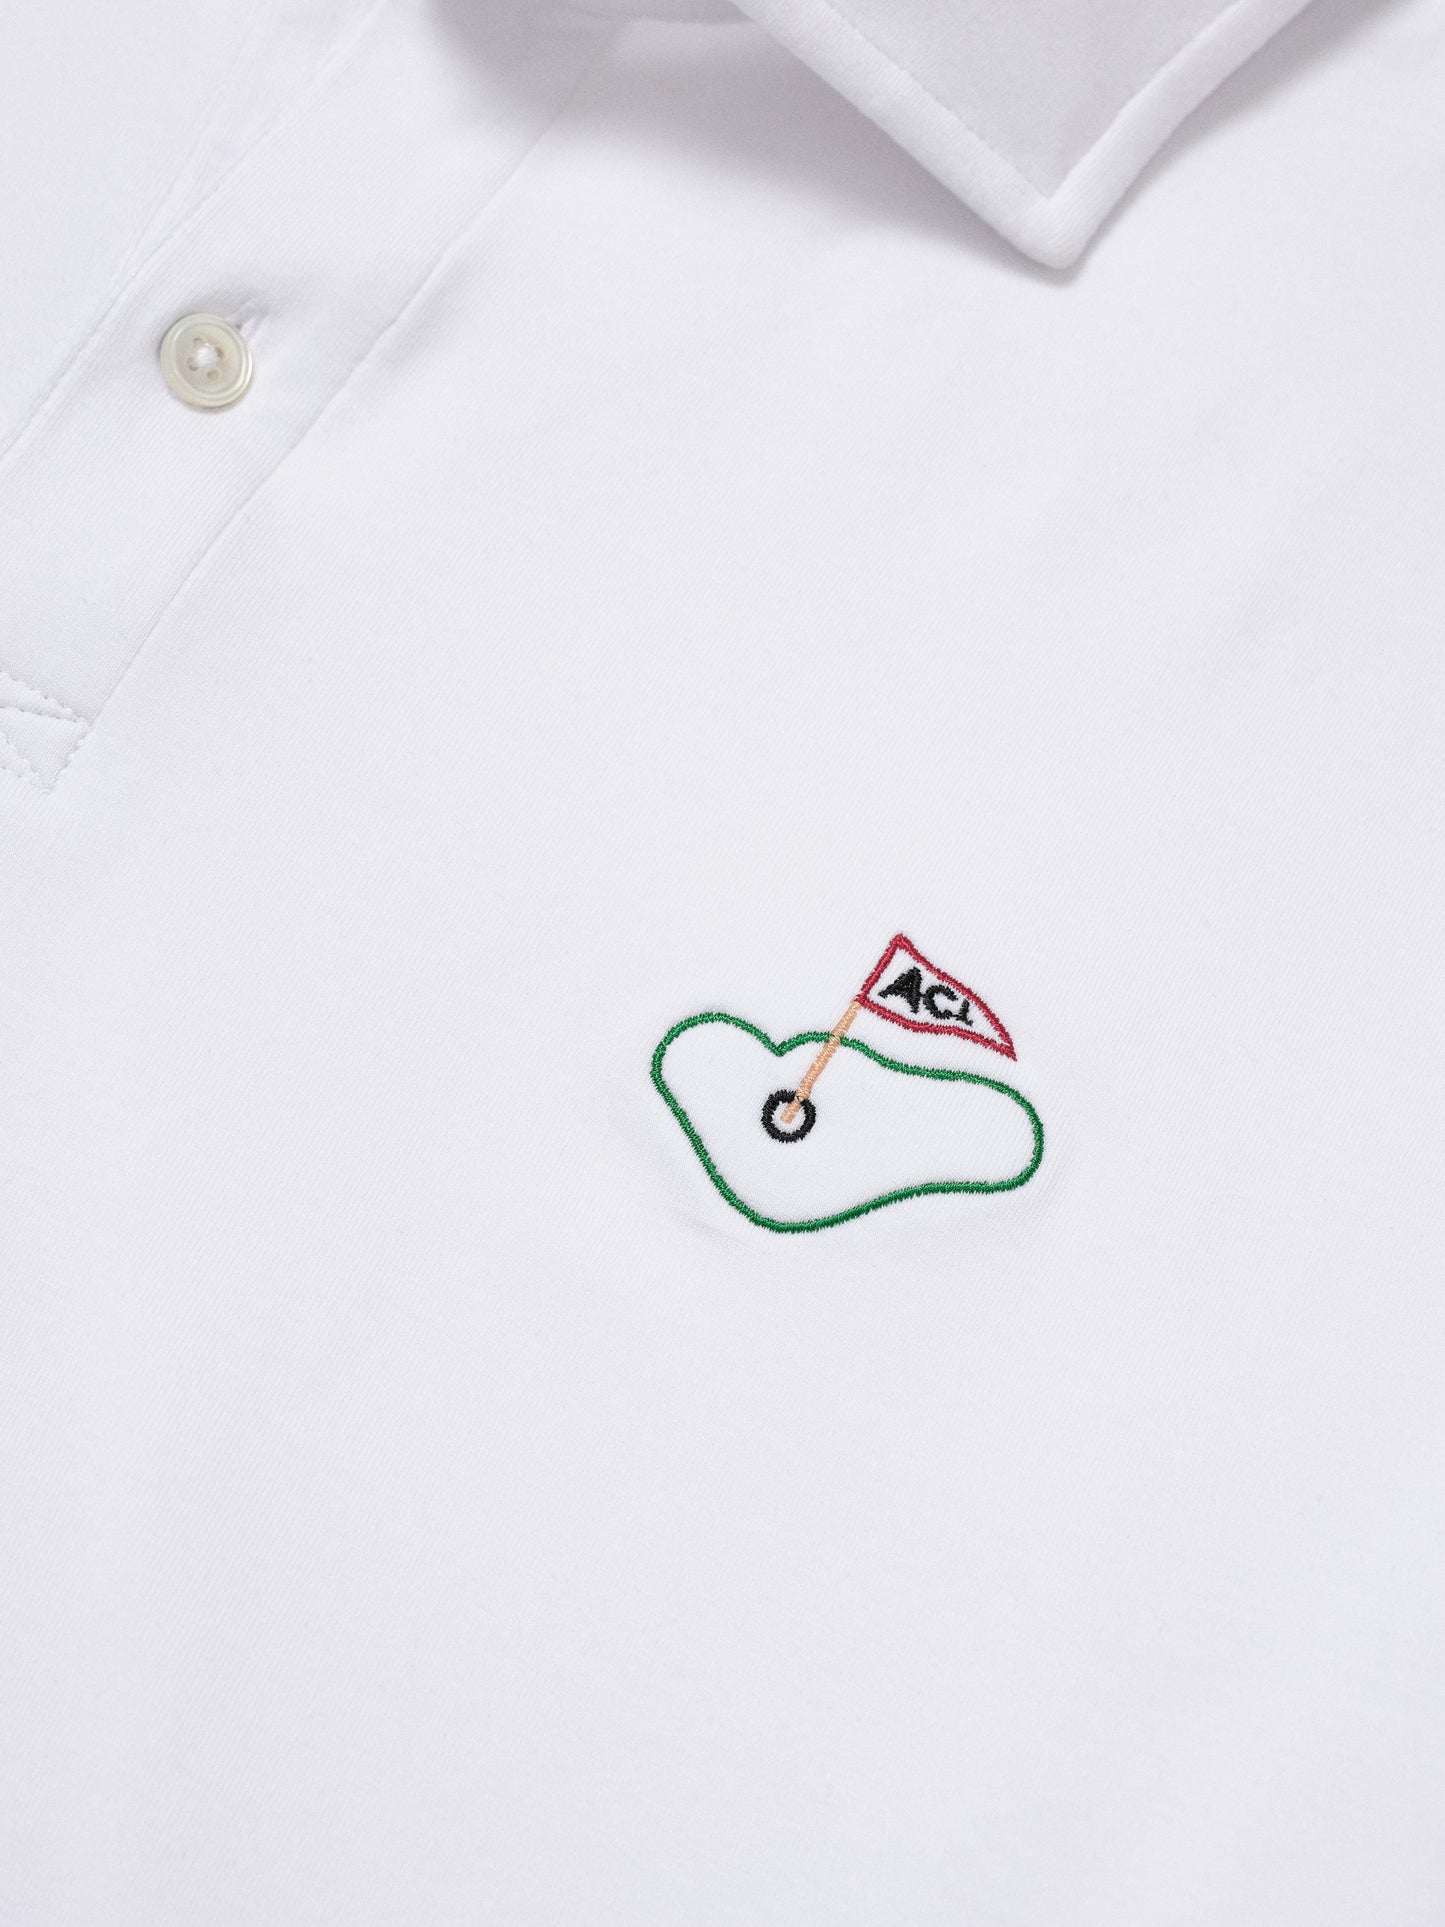 Holderness & Bourne Cotton Polo Shirt in White